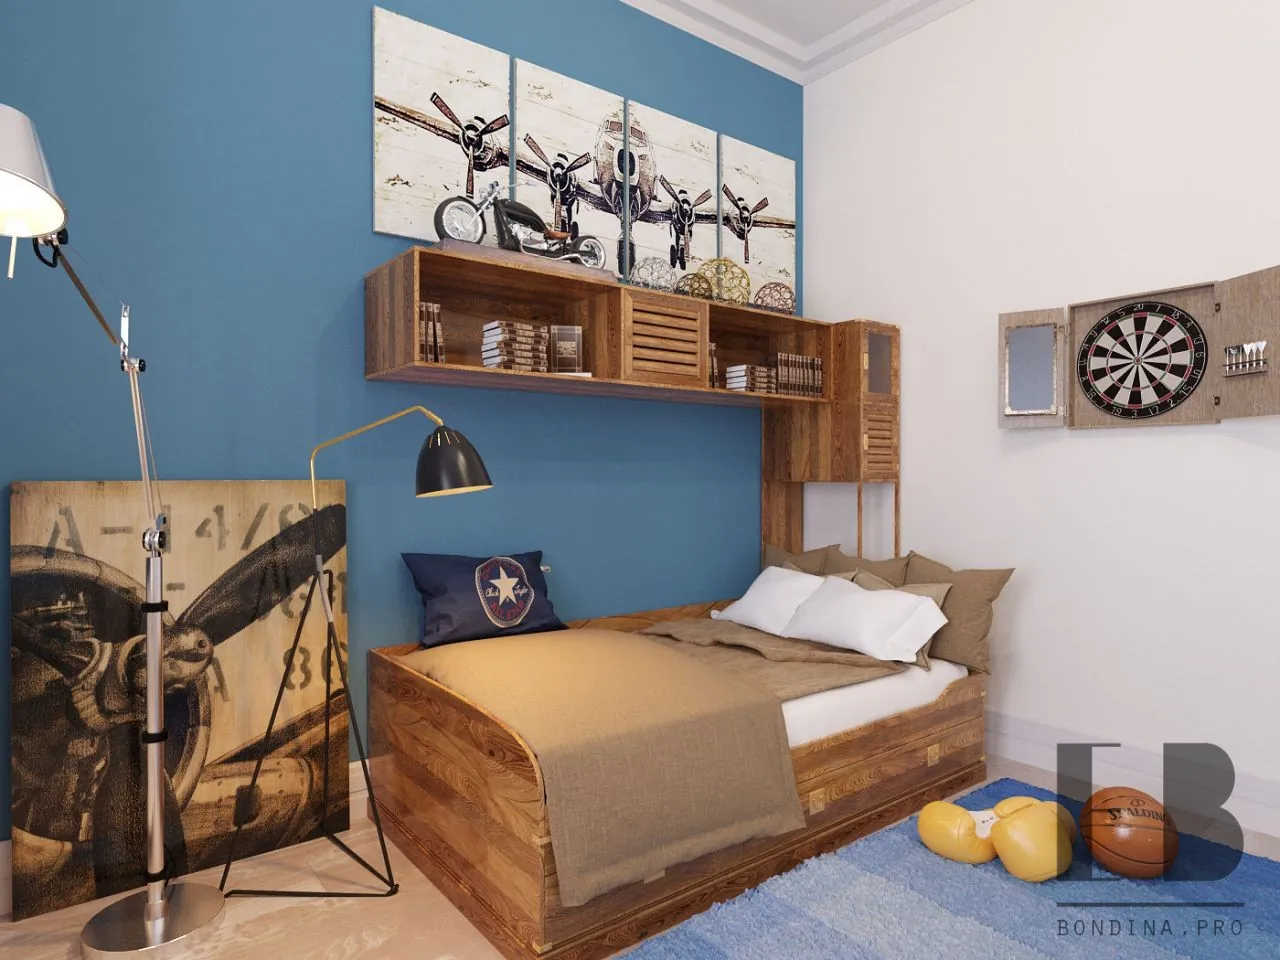 aviator themed bedroom design with blue walls and wood furniture